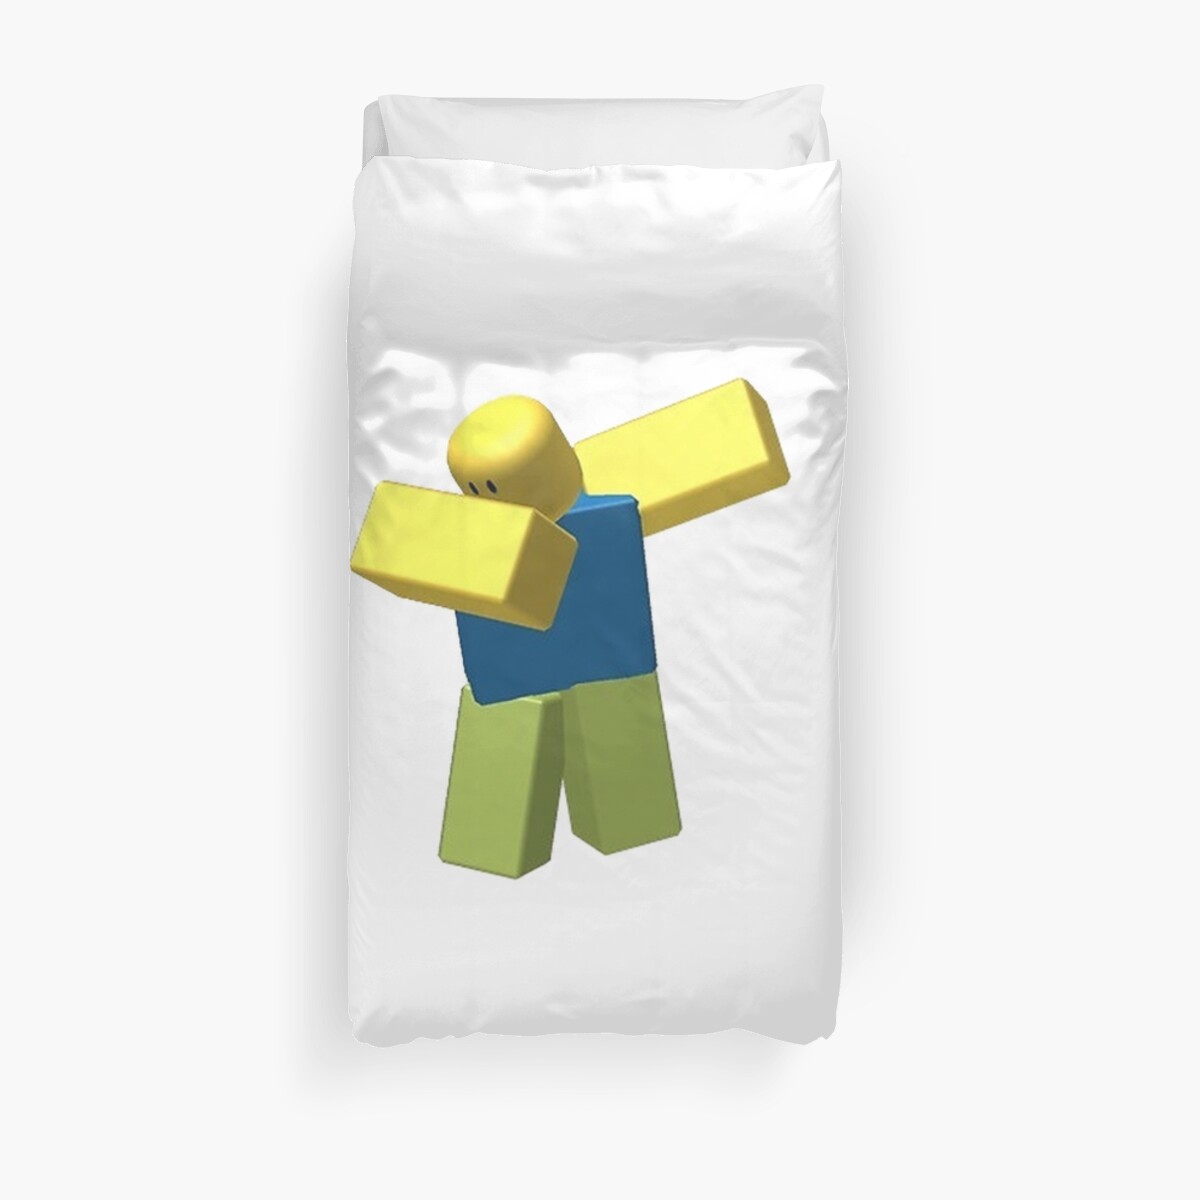 How To Make Your Own Shirt On Roblox On Ipad Toffee Art - how to make your own t shirt in roblox on ipad toffee art